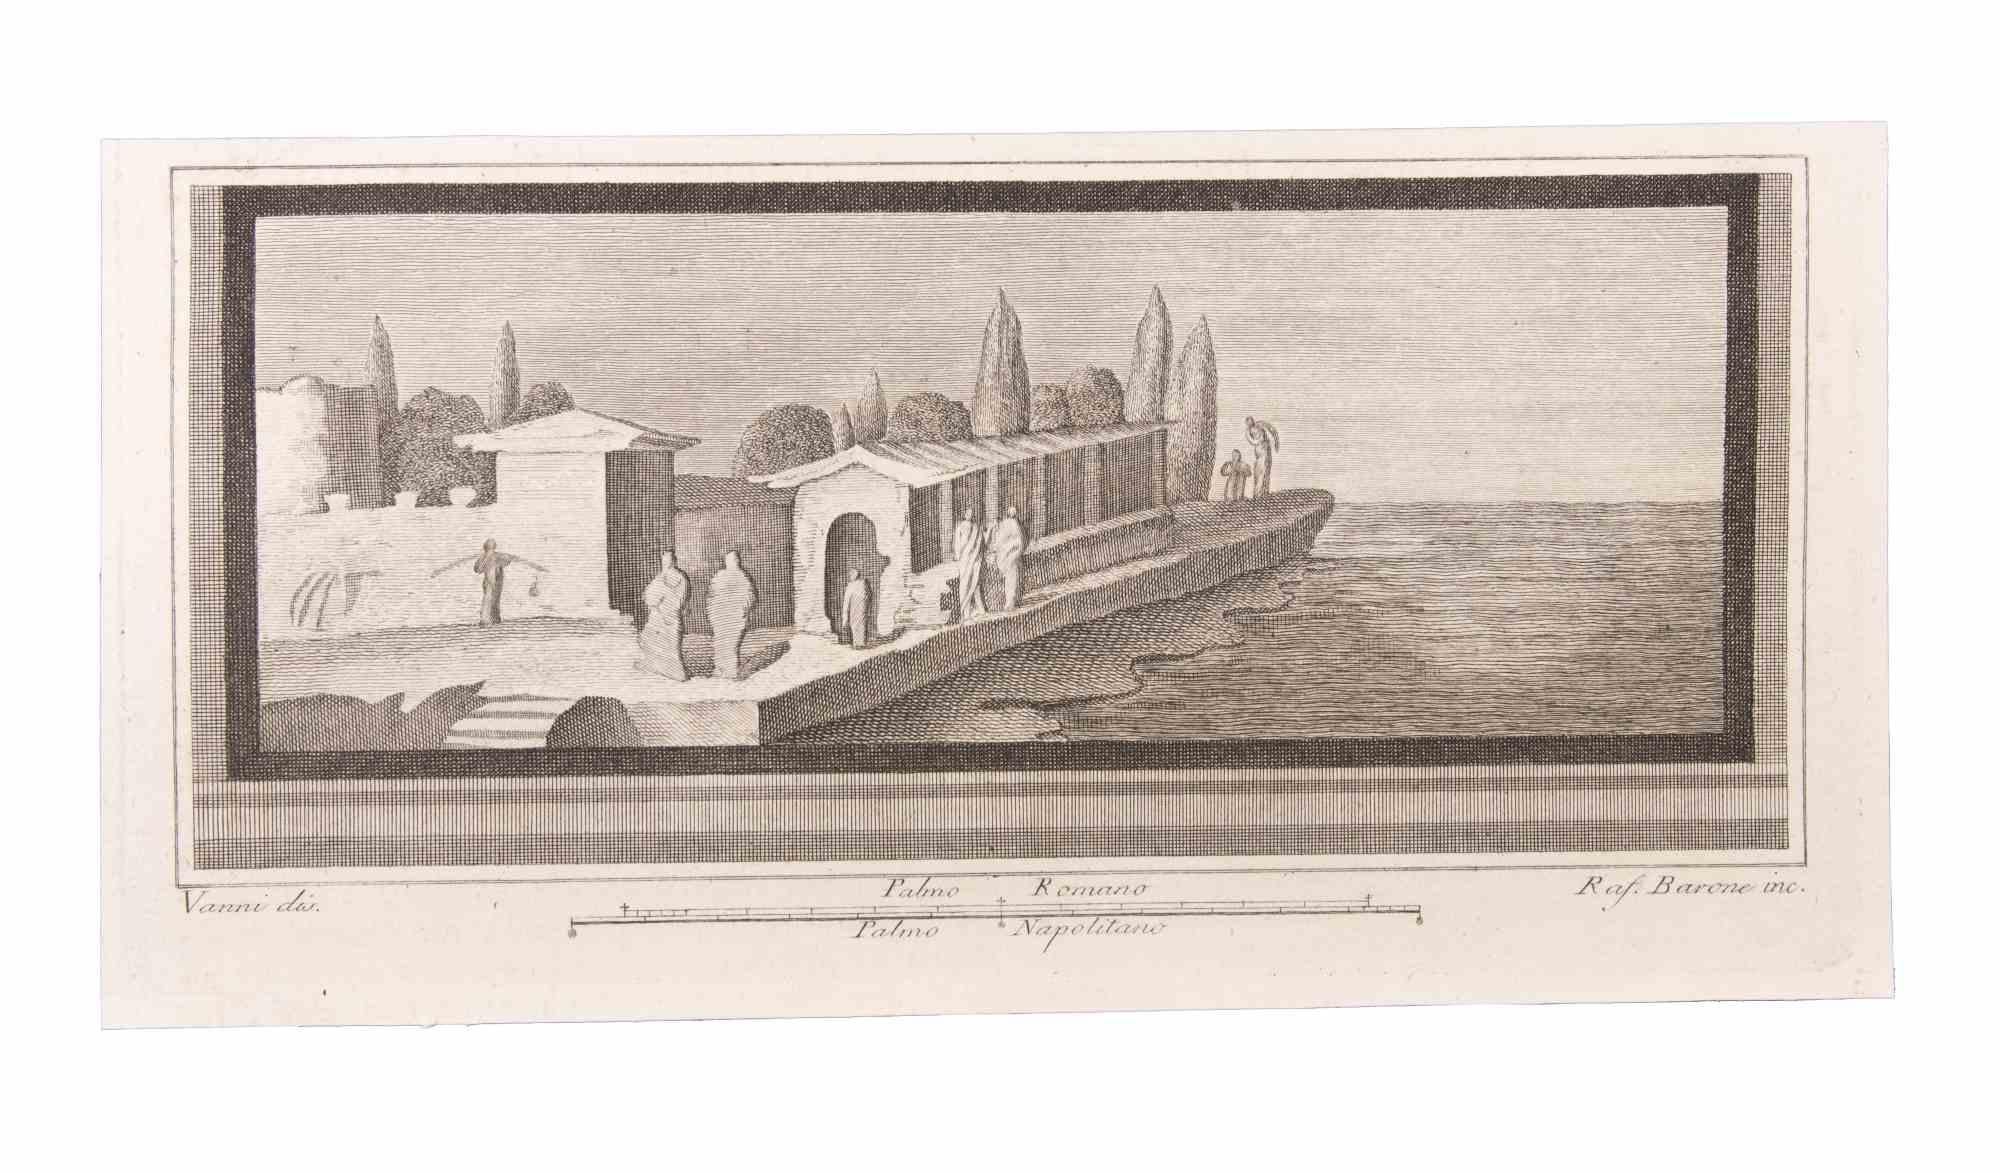 Seascape With Monuments - Etching by Raffaele Barone  - 18th Century